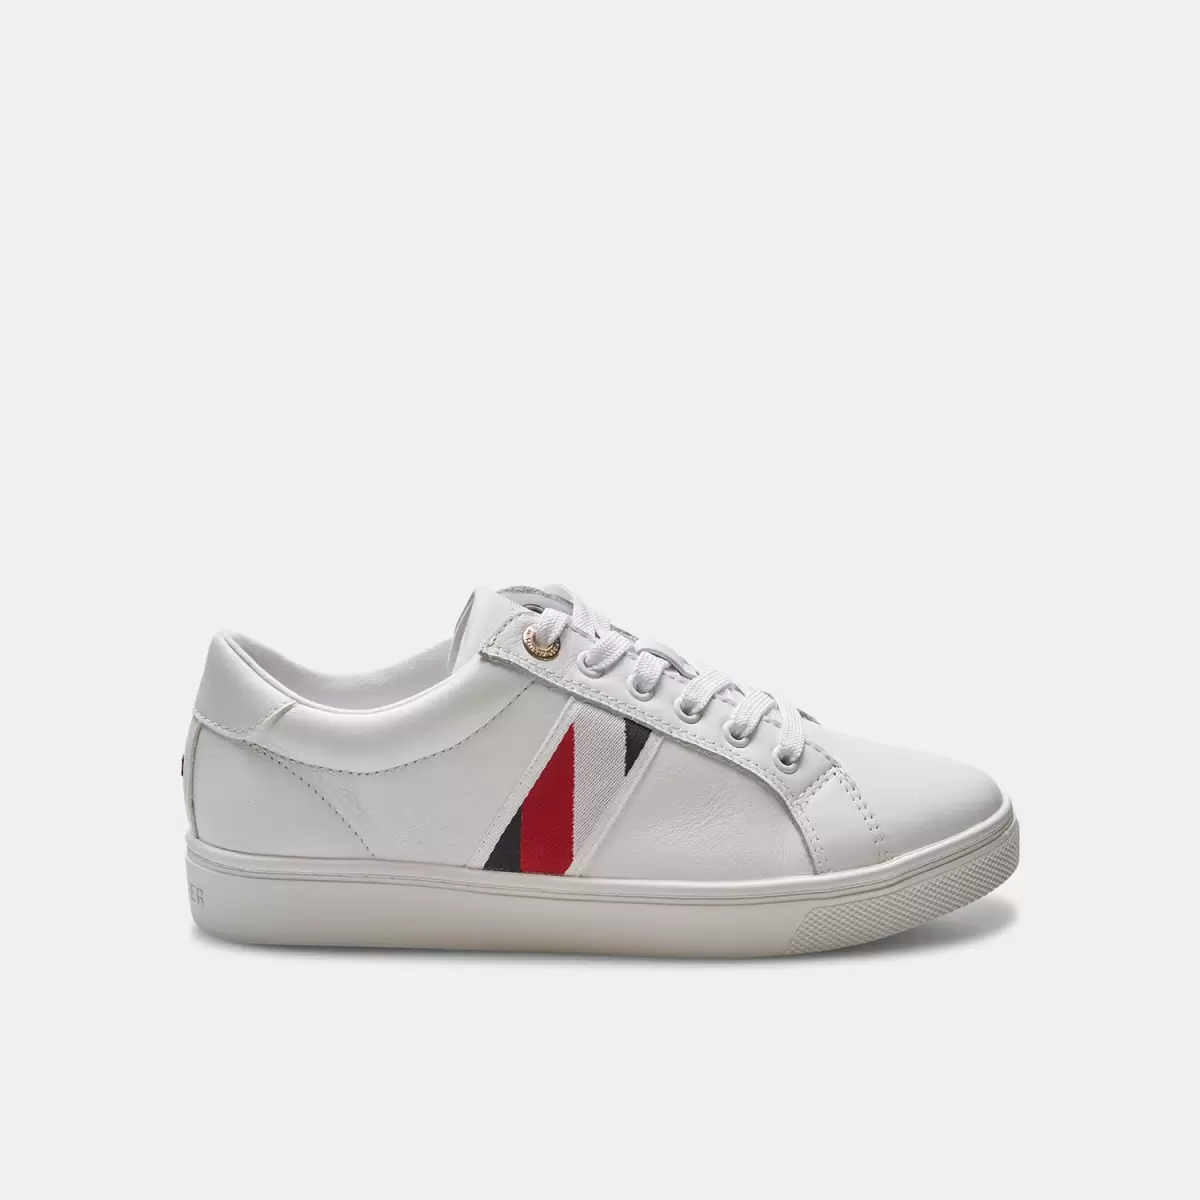 In Linea Sneakers Sneaker Donna In Pelle Tommy Hilfigher Donna Bianco Bata